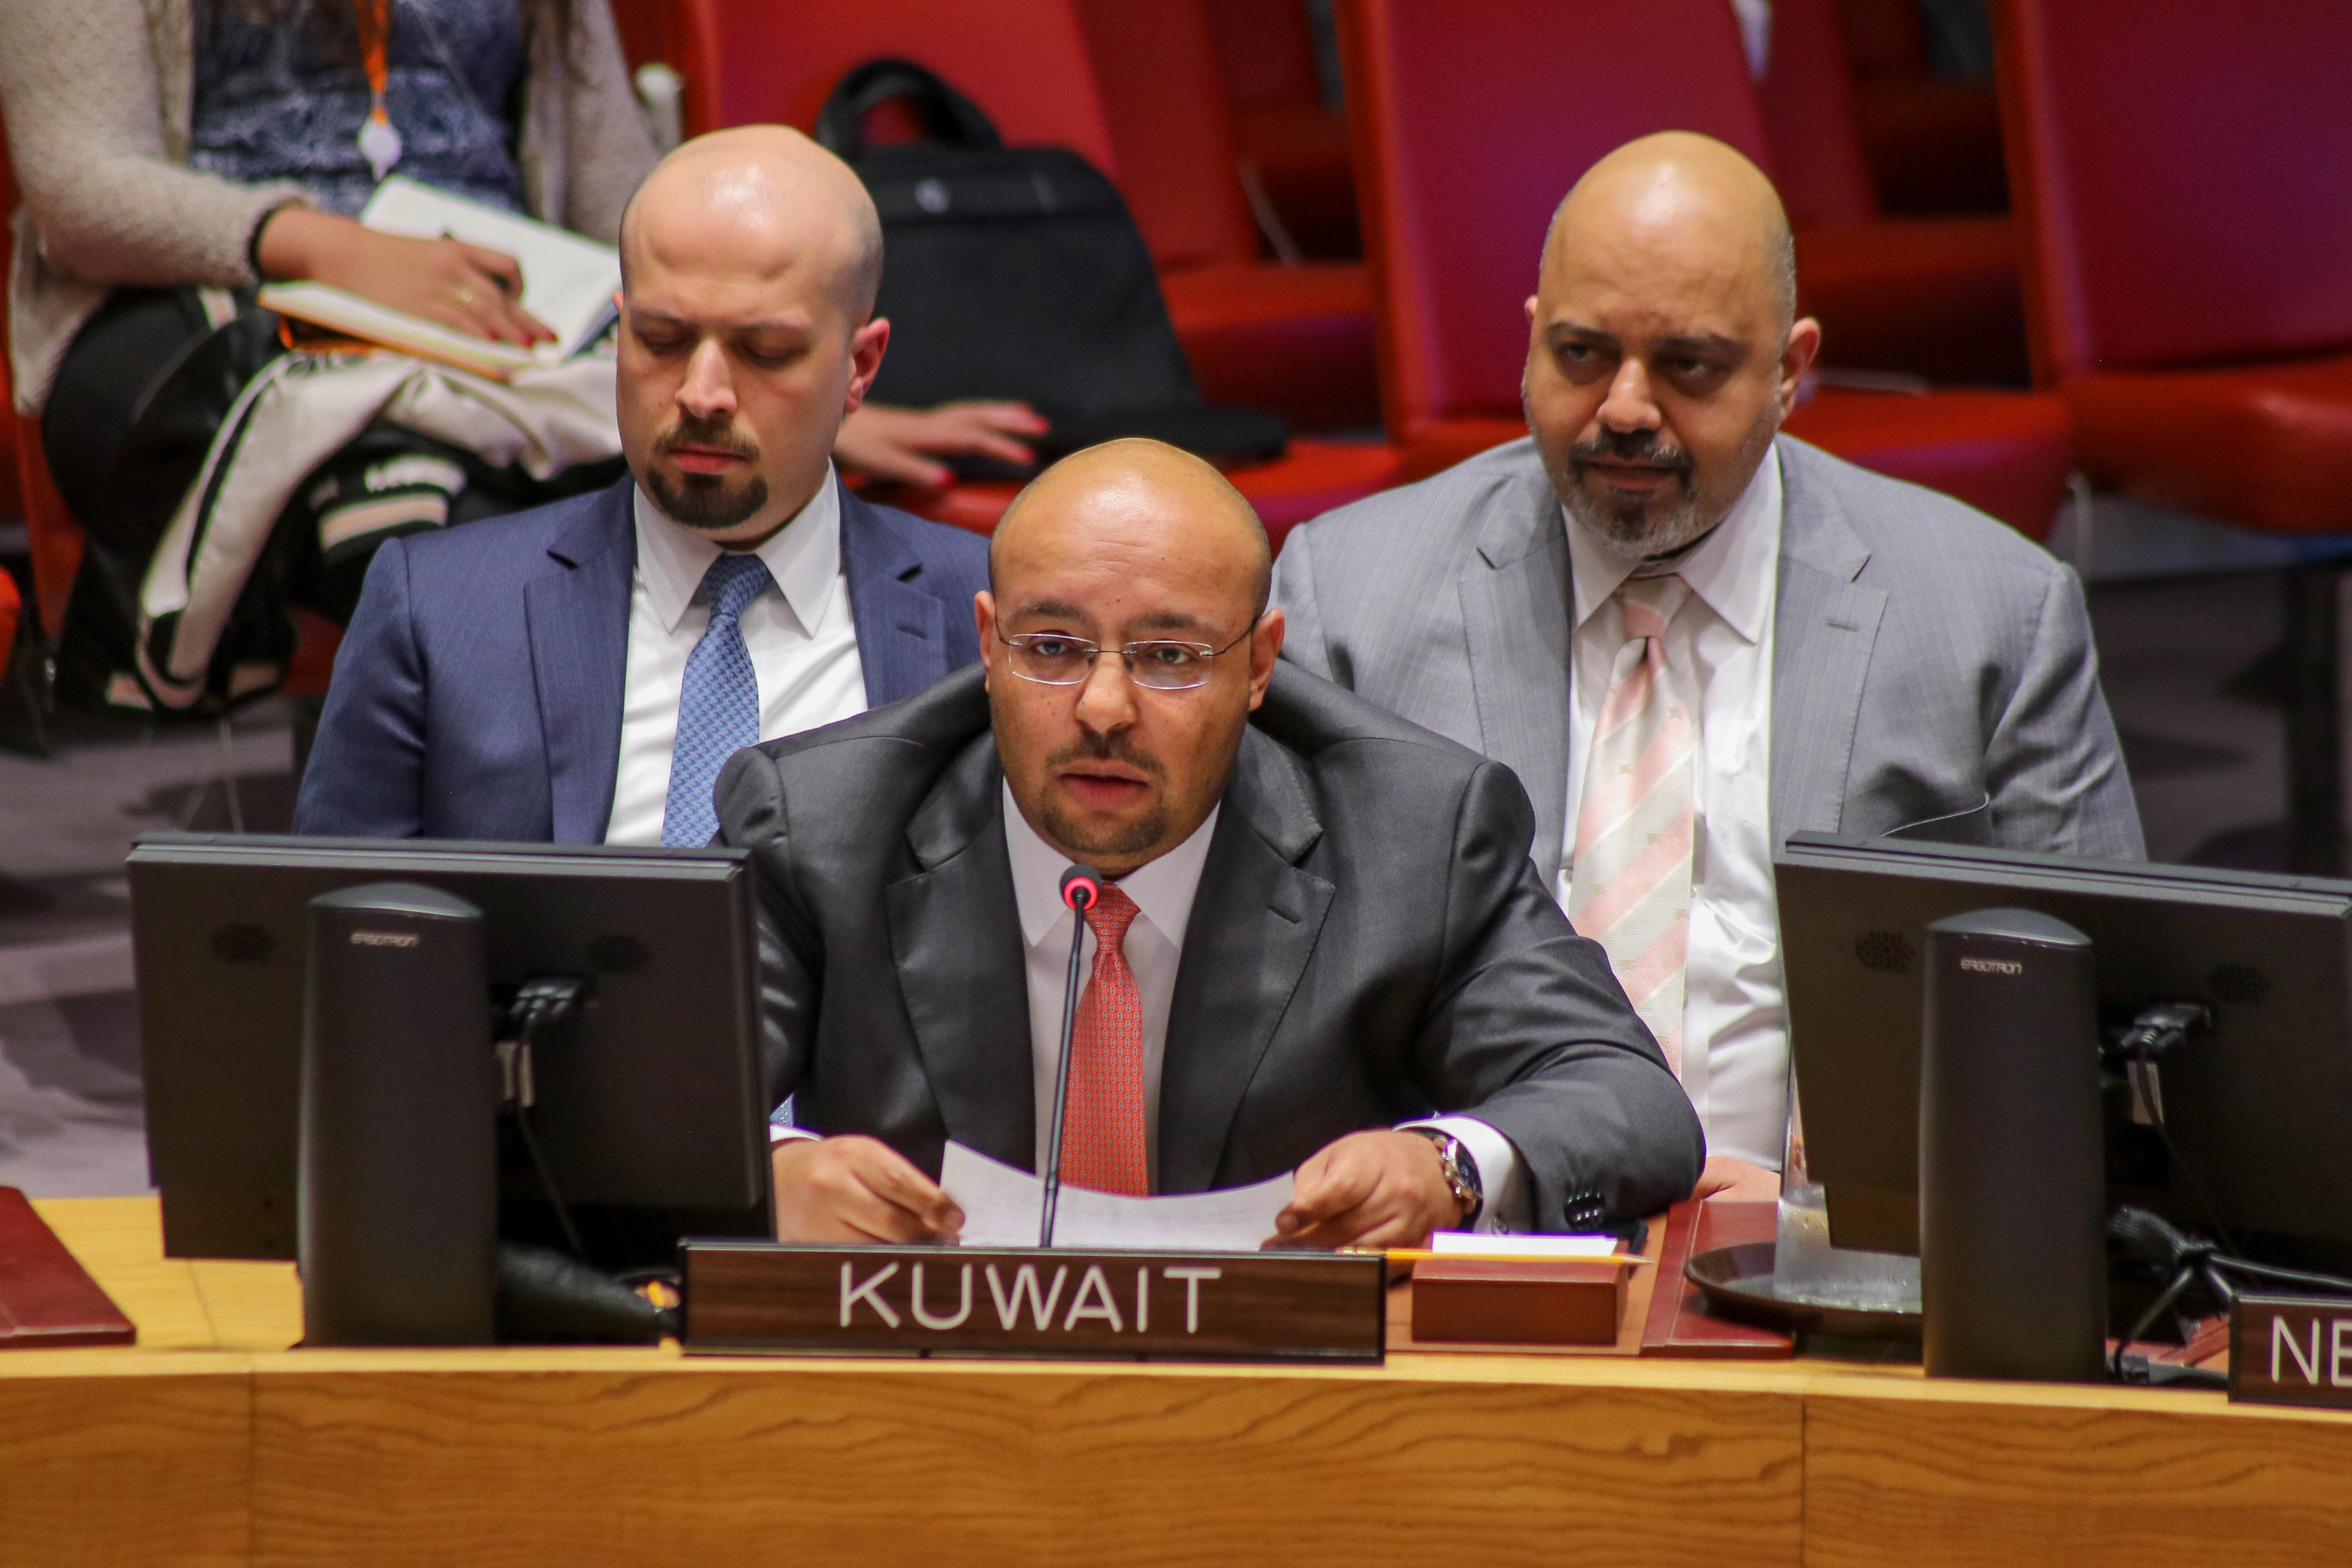 Acting charge d'affairs of the Kuwaiti permanent mission to the UN headquarters in New York, advisor Talal Al-Fassam 